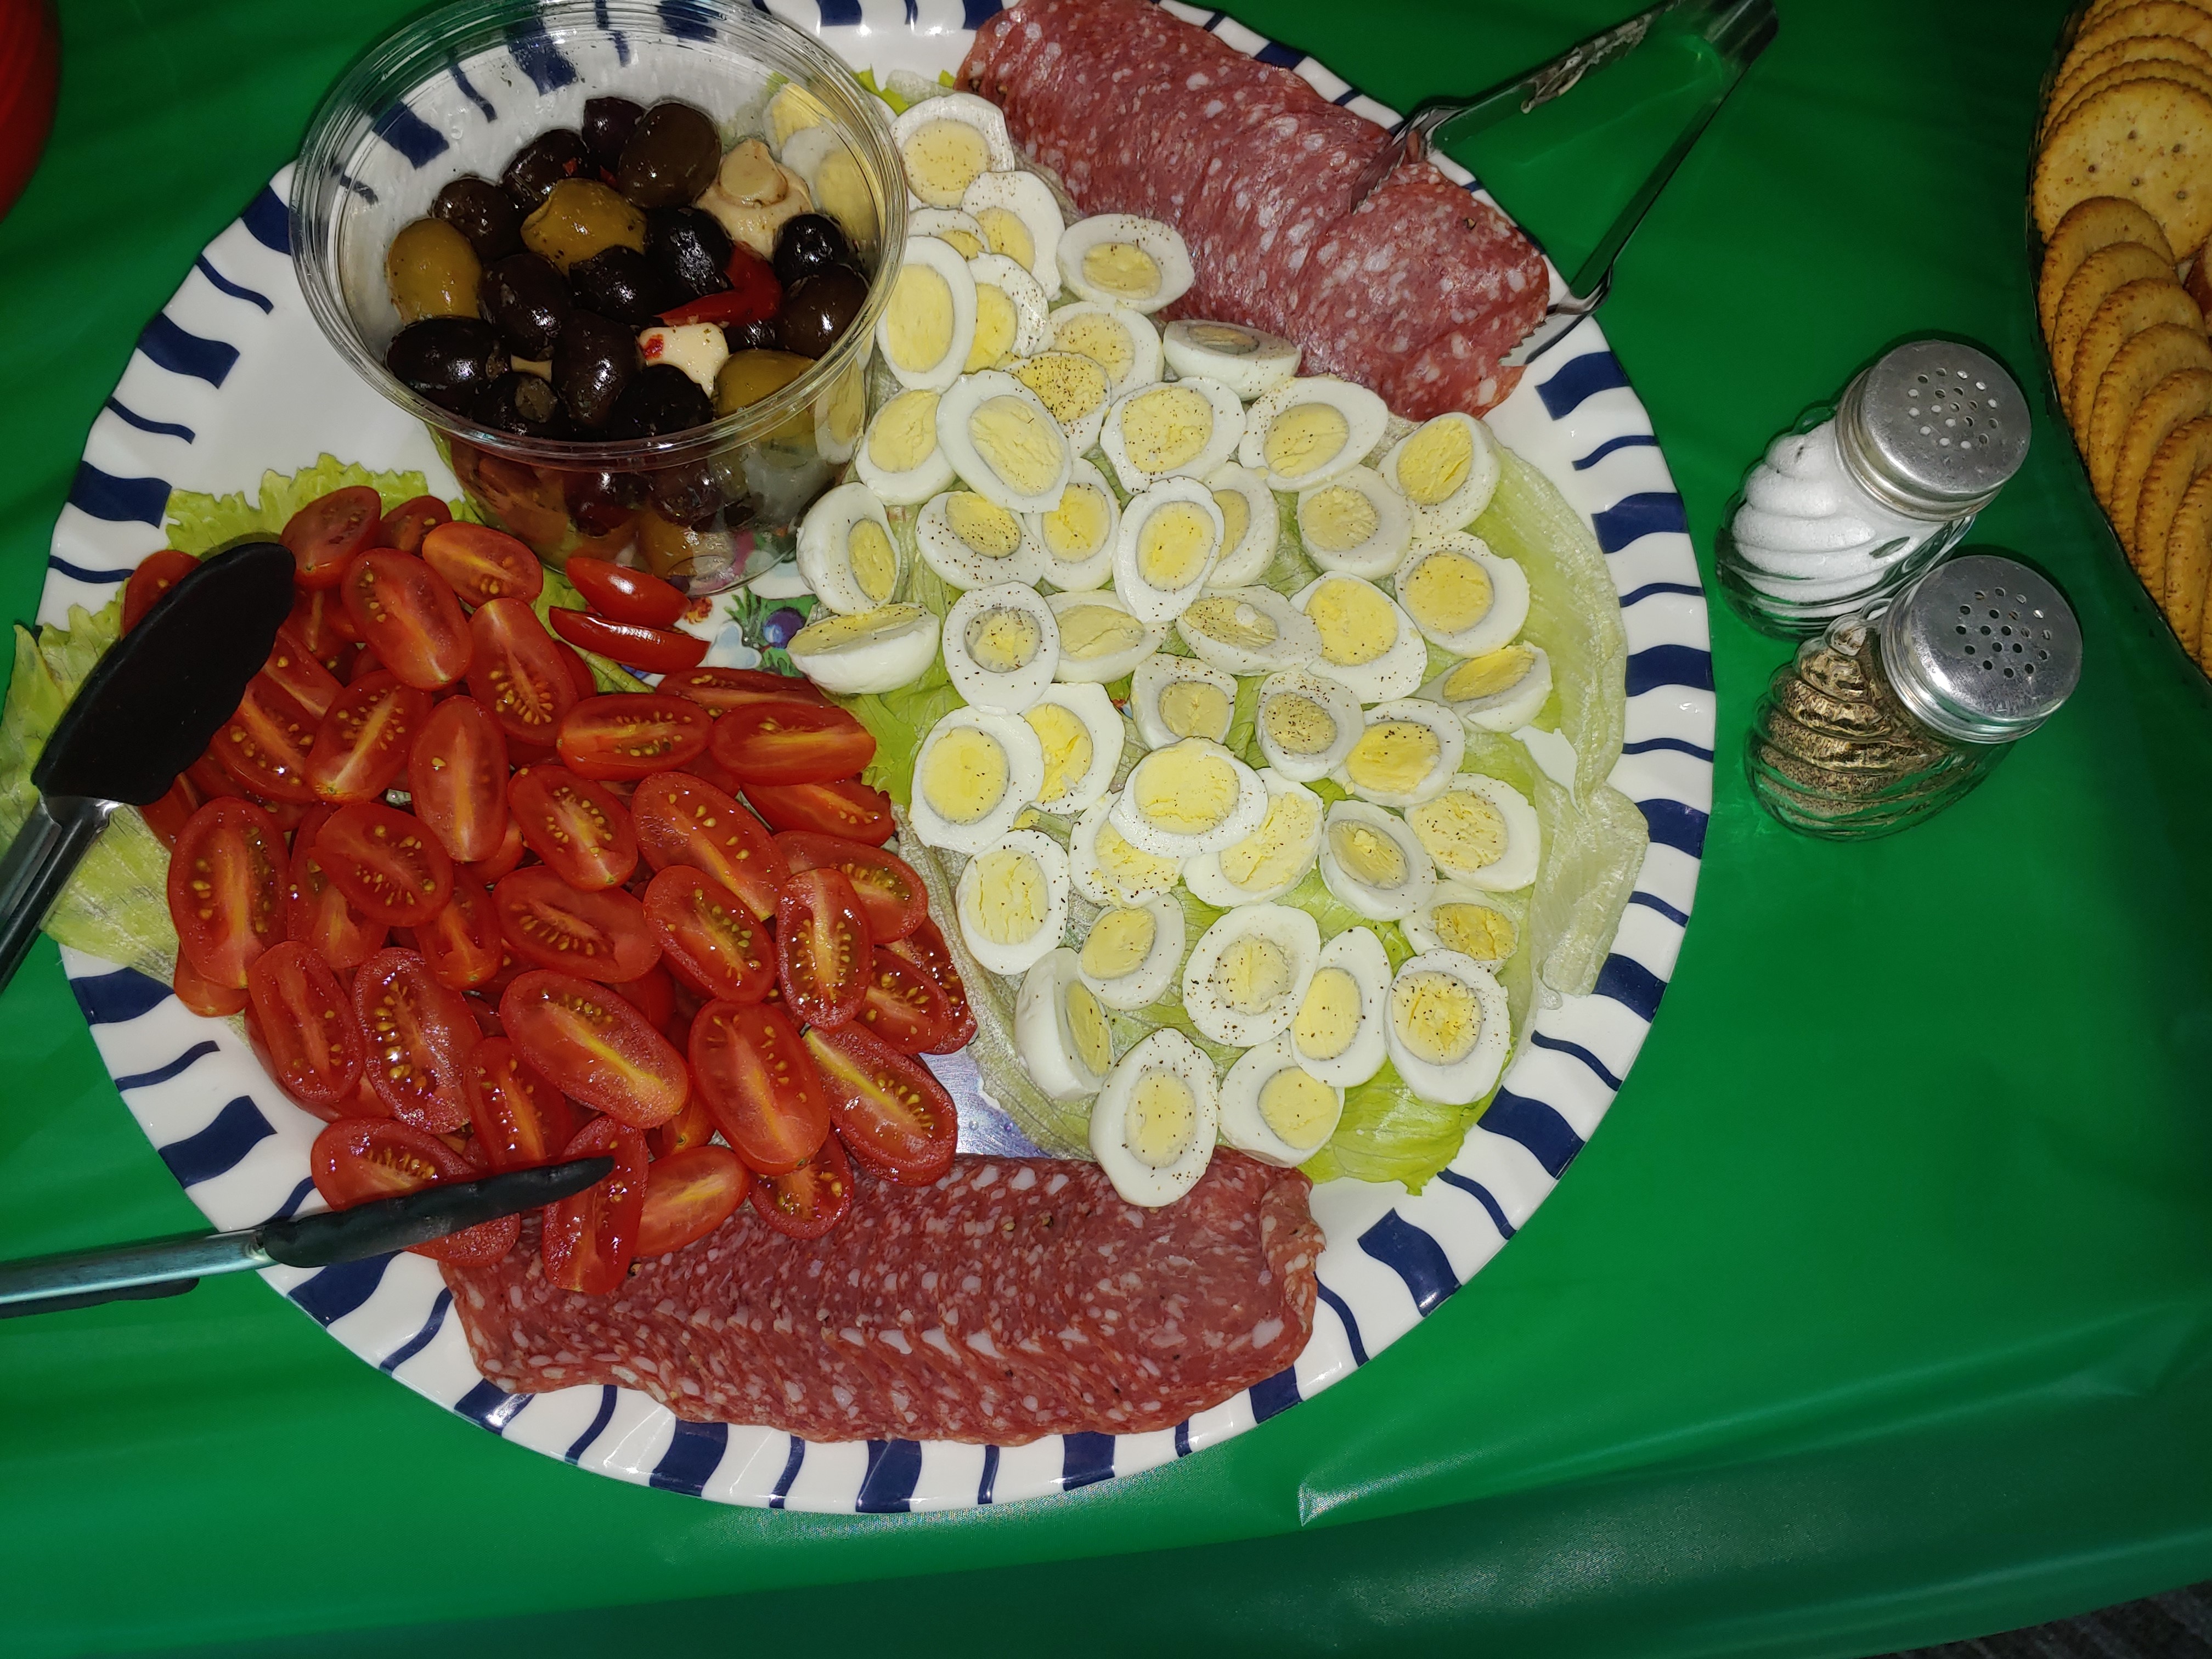 A plate features quail eggs, tomatoes, salami, and olives ready to eat.